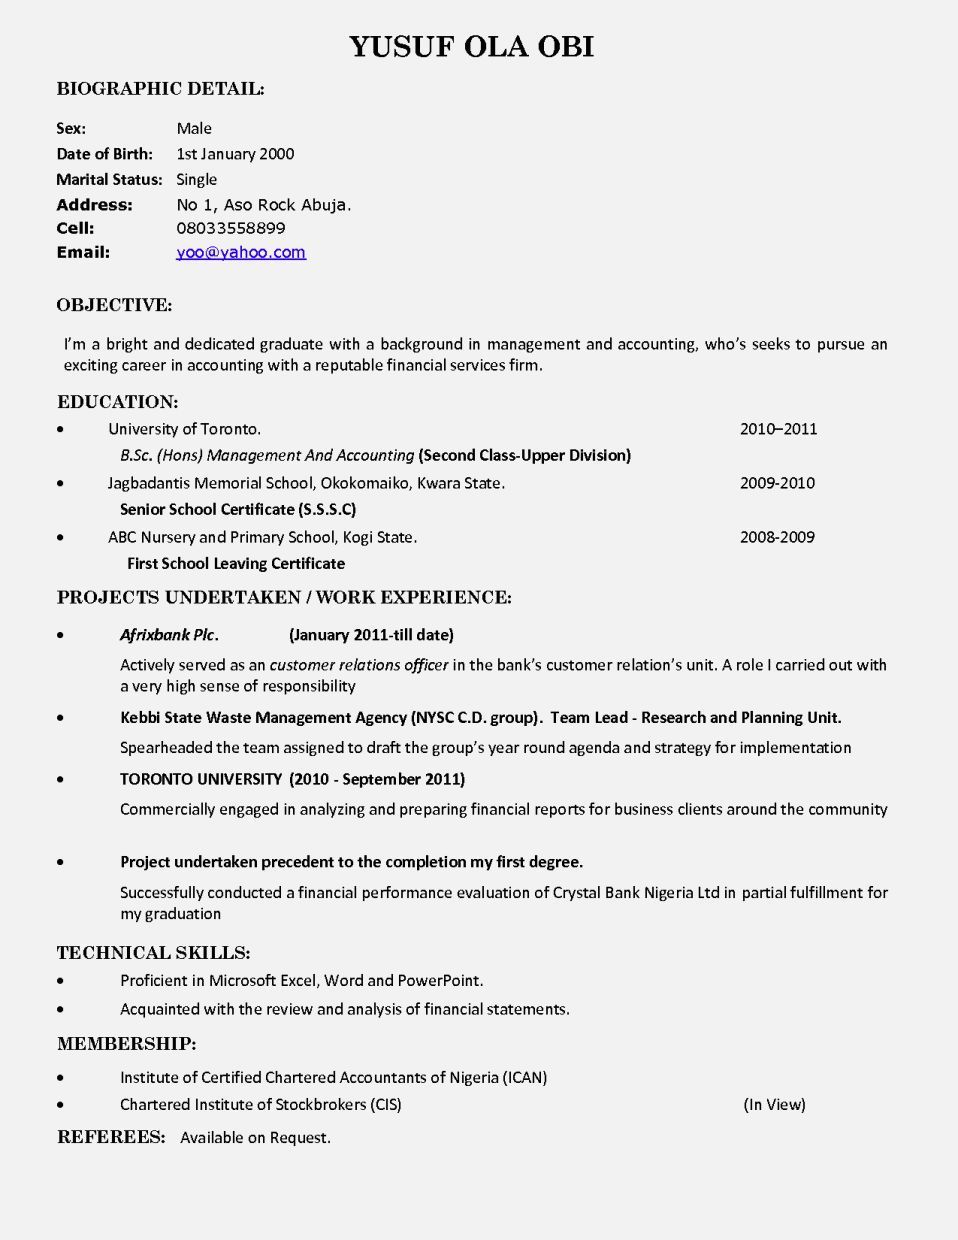 Image Result For Sample Of Curriculum Vitae In Nigeria within size 958 X 1240